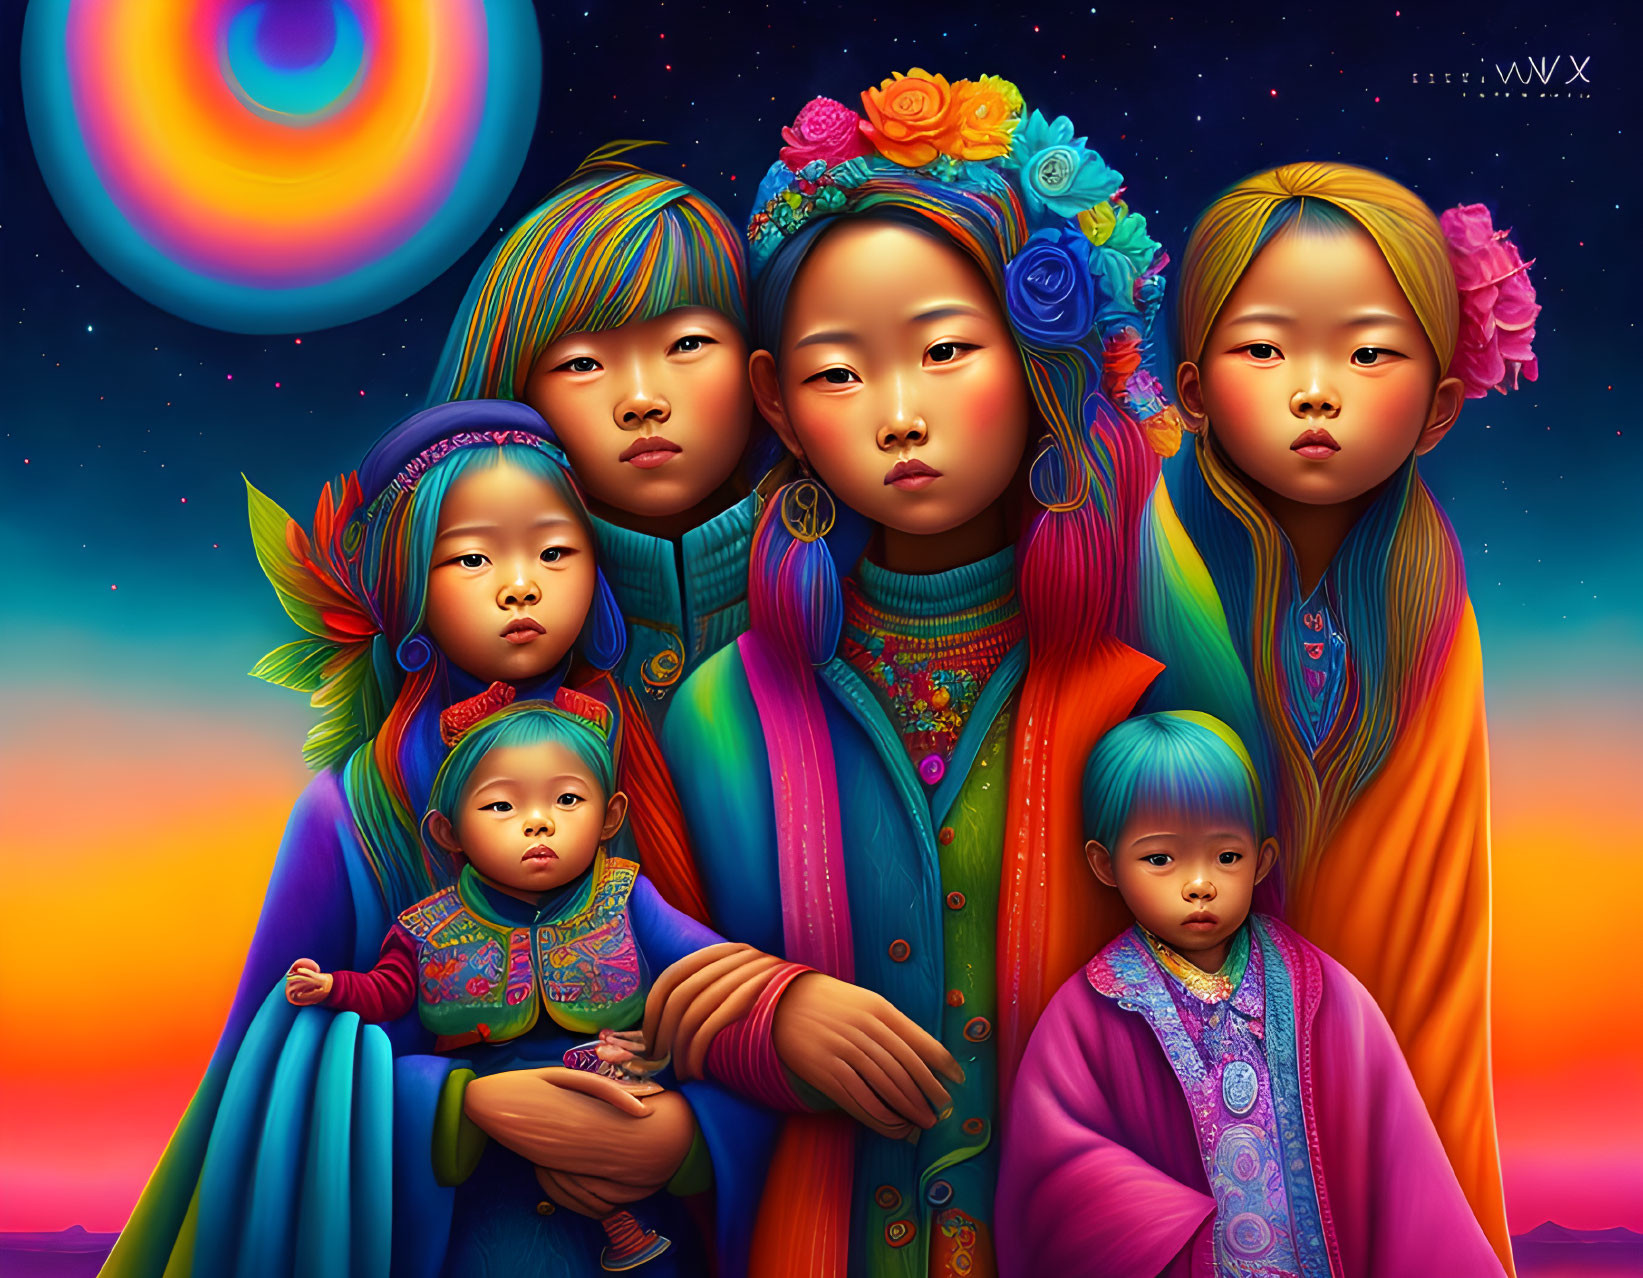 Six Asian children in traditional attire against surreal sunset and celestial backdrop